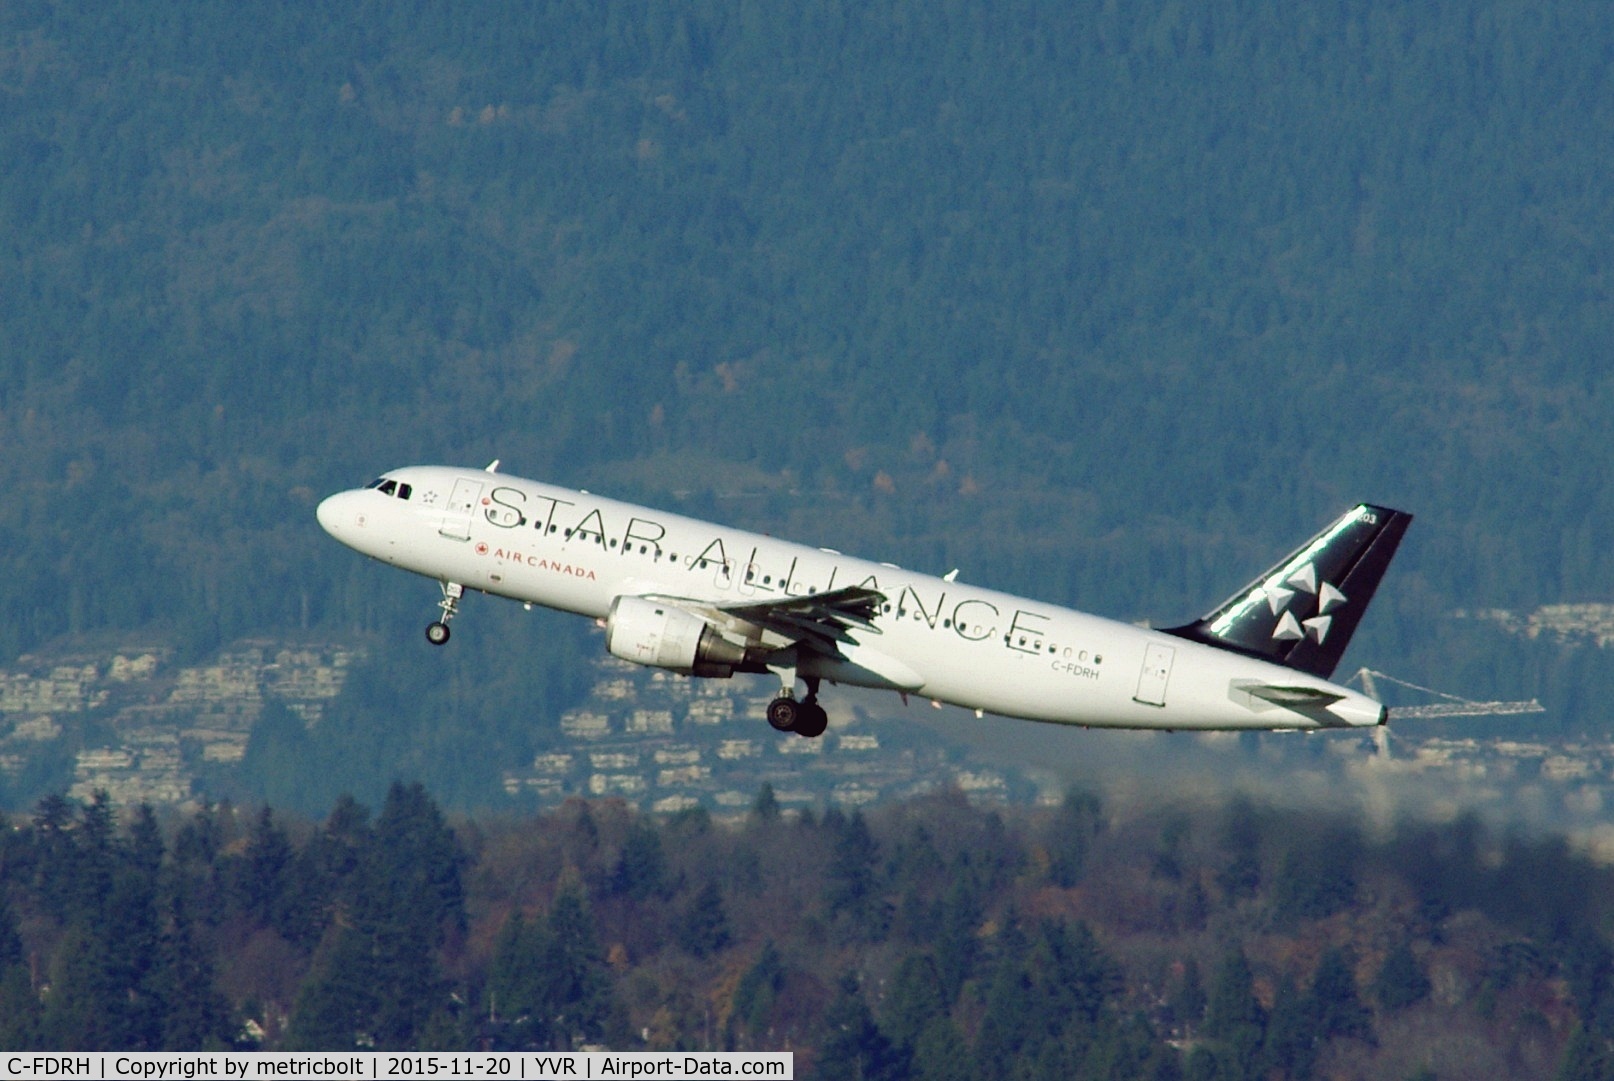 C-FDRH, 1989 Airbus A320-211 C/N 073, Departure from YVR